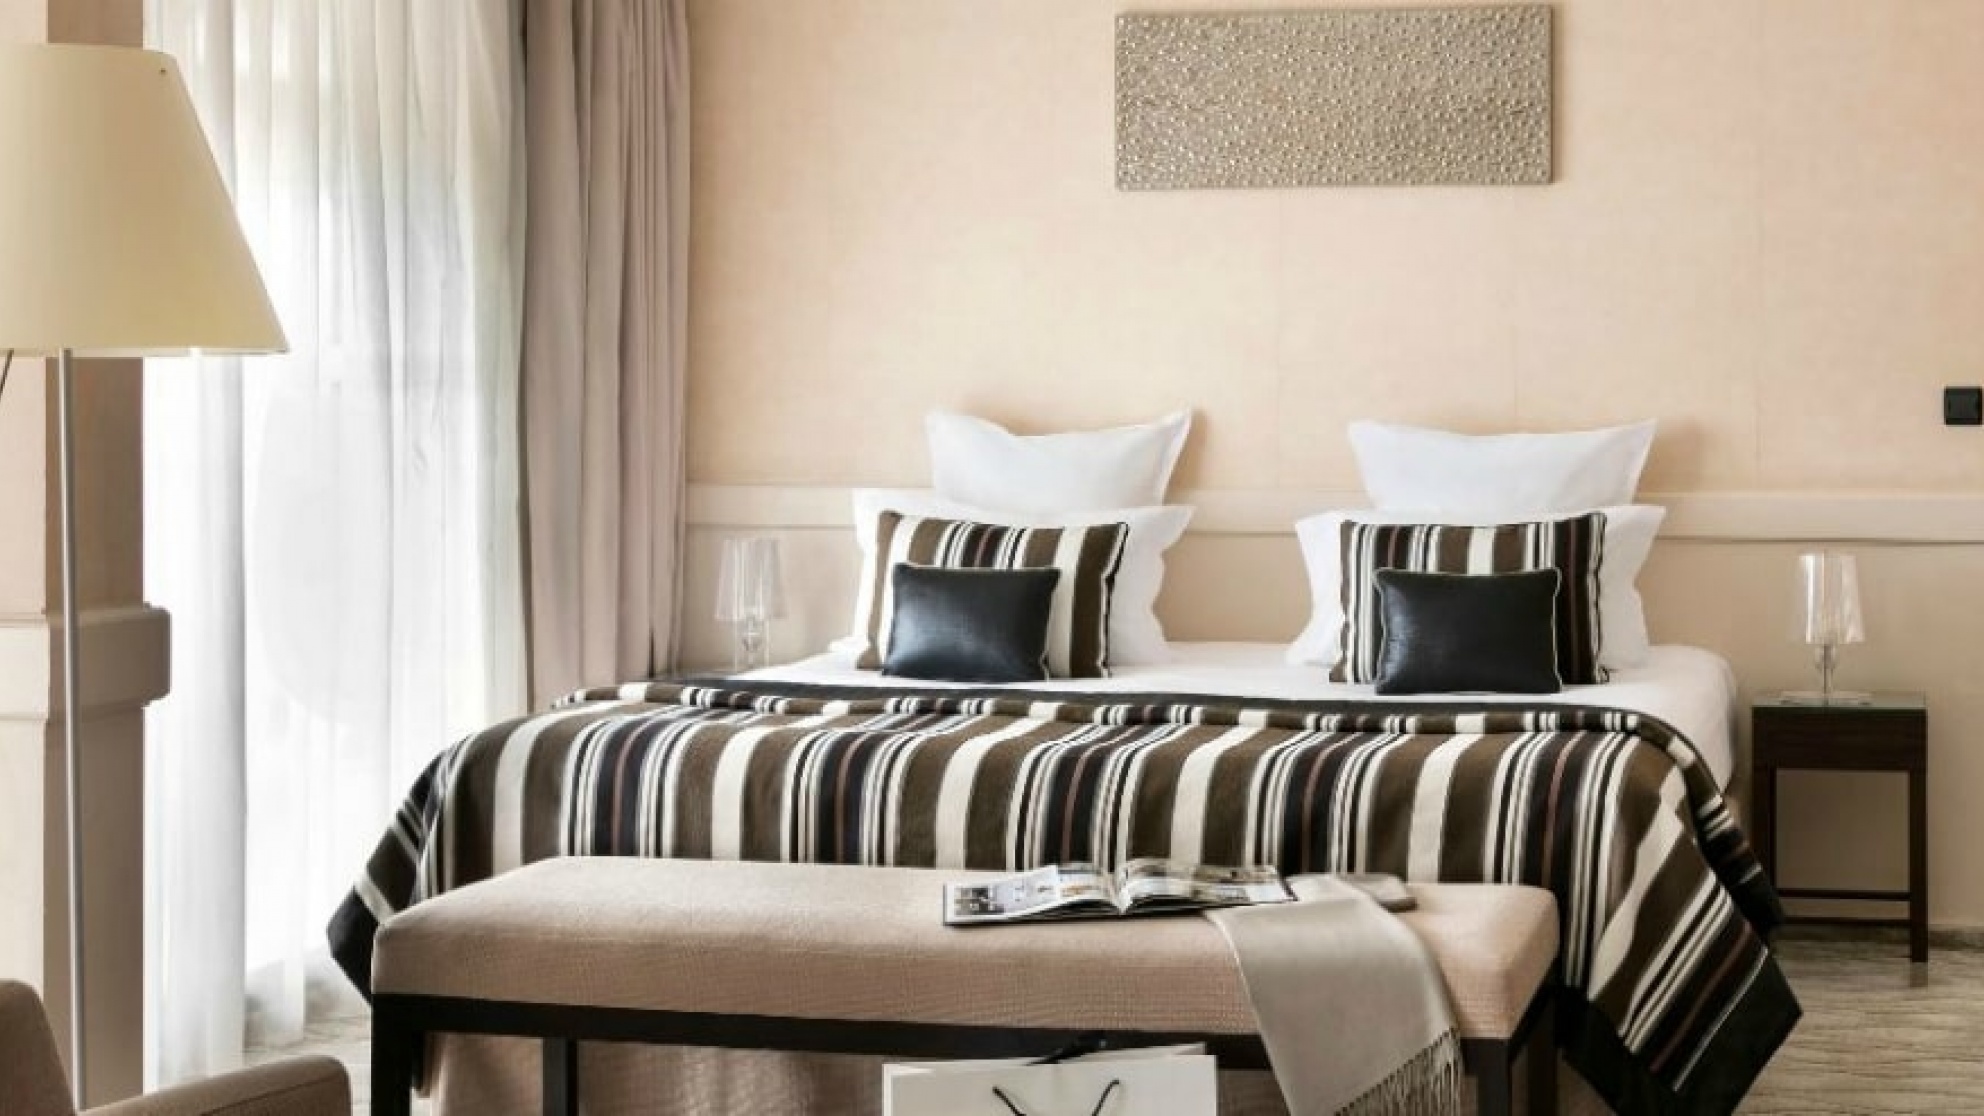 Hotel Barriere Le Gray d'Albion, Cannes